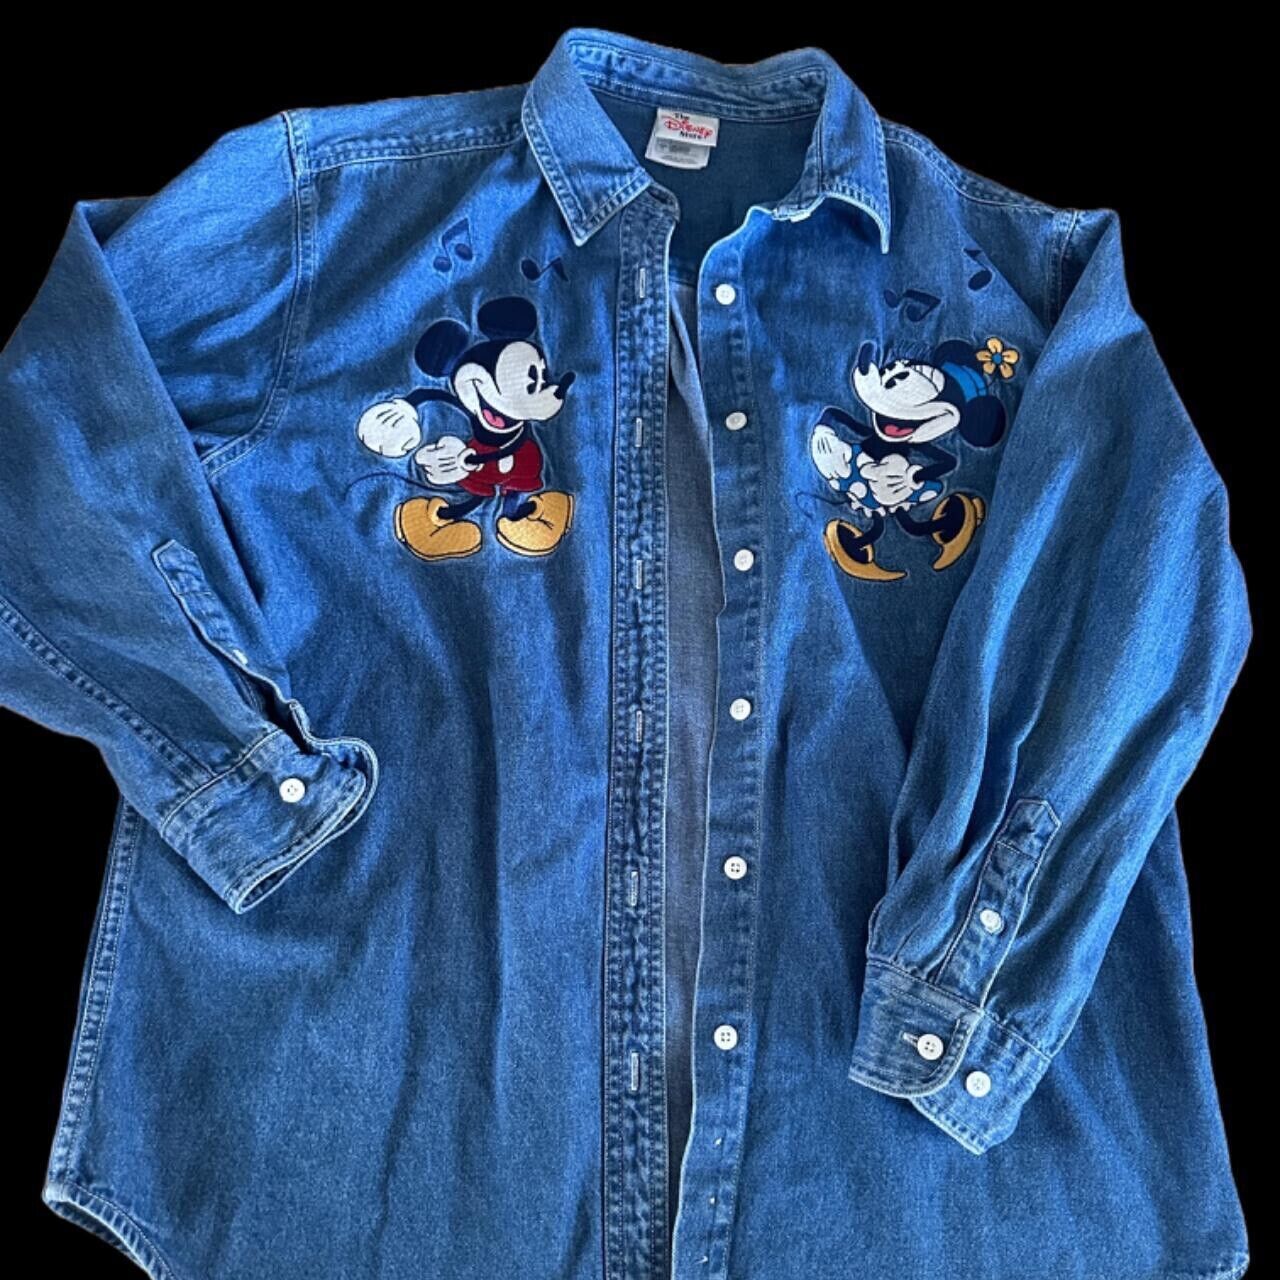 Vintage Disney Store Embroidered Mickey Mouse L Size Shirt